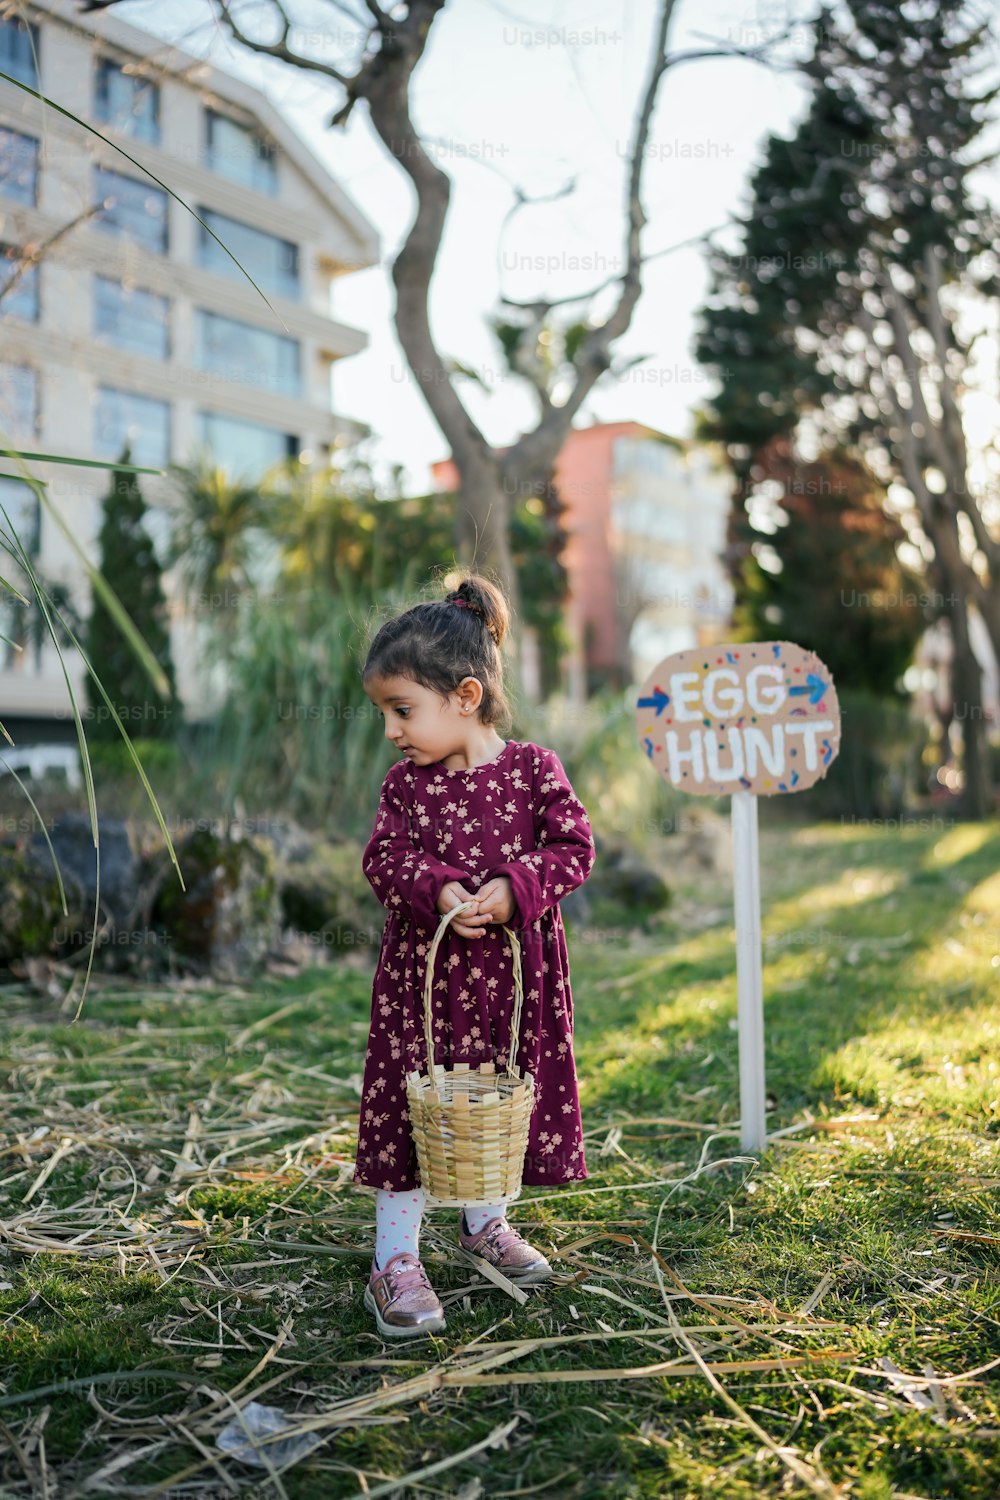 a little girl holding a basket standing next to a sign